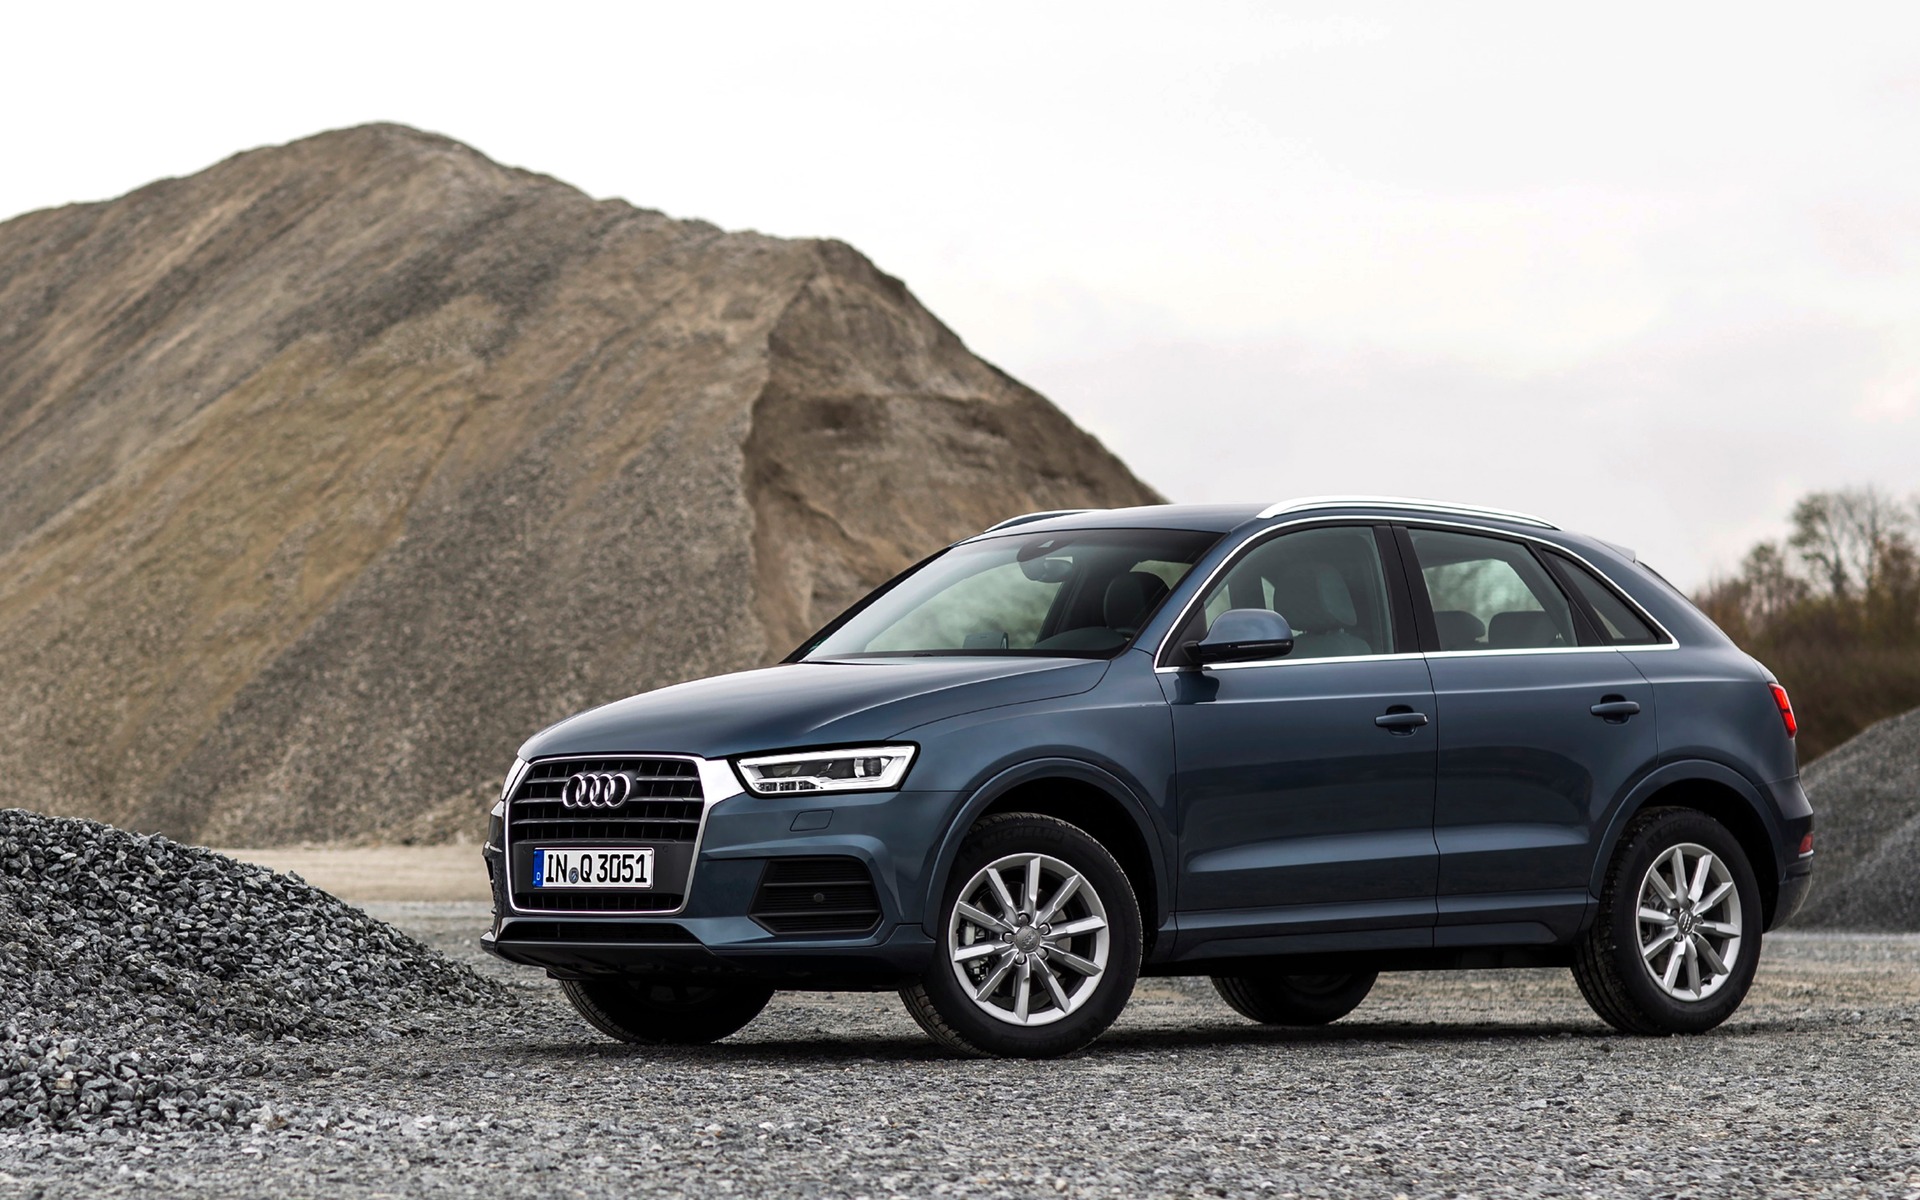 Audi's counting on the badge to move a significant portion of Q3 inventory.